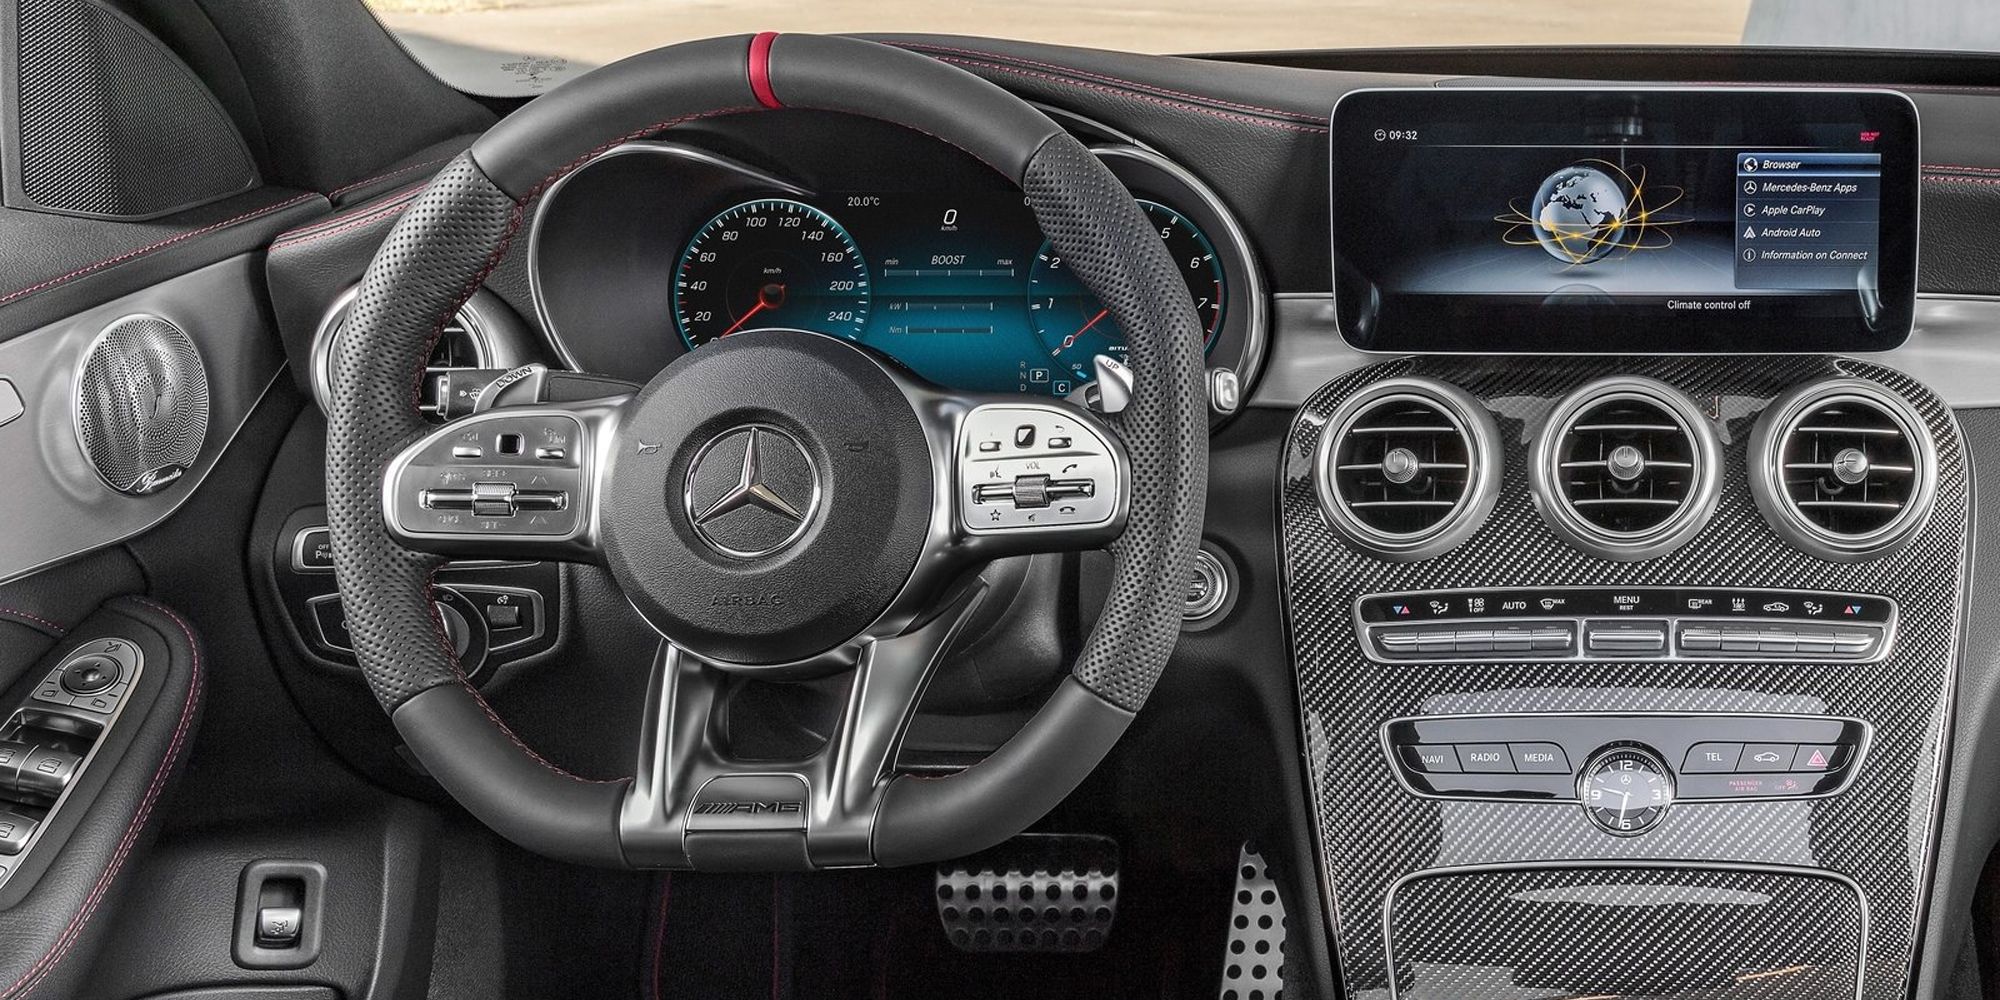 The interior of the C43 AMG, behind the wheel